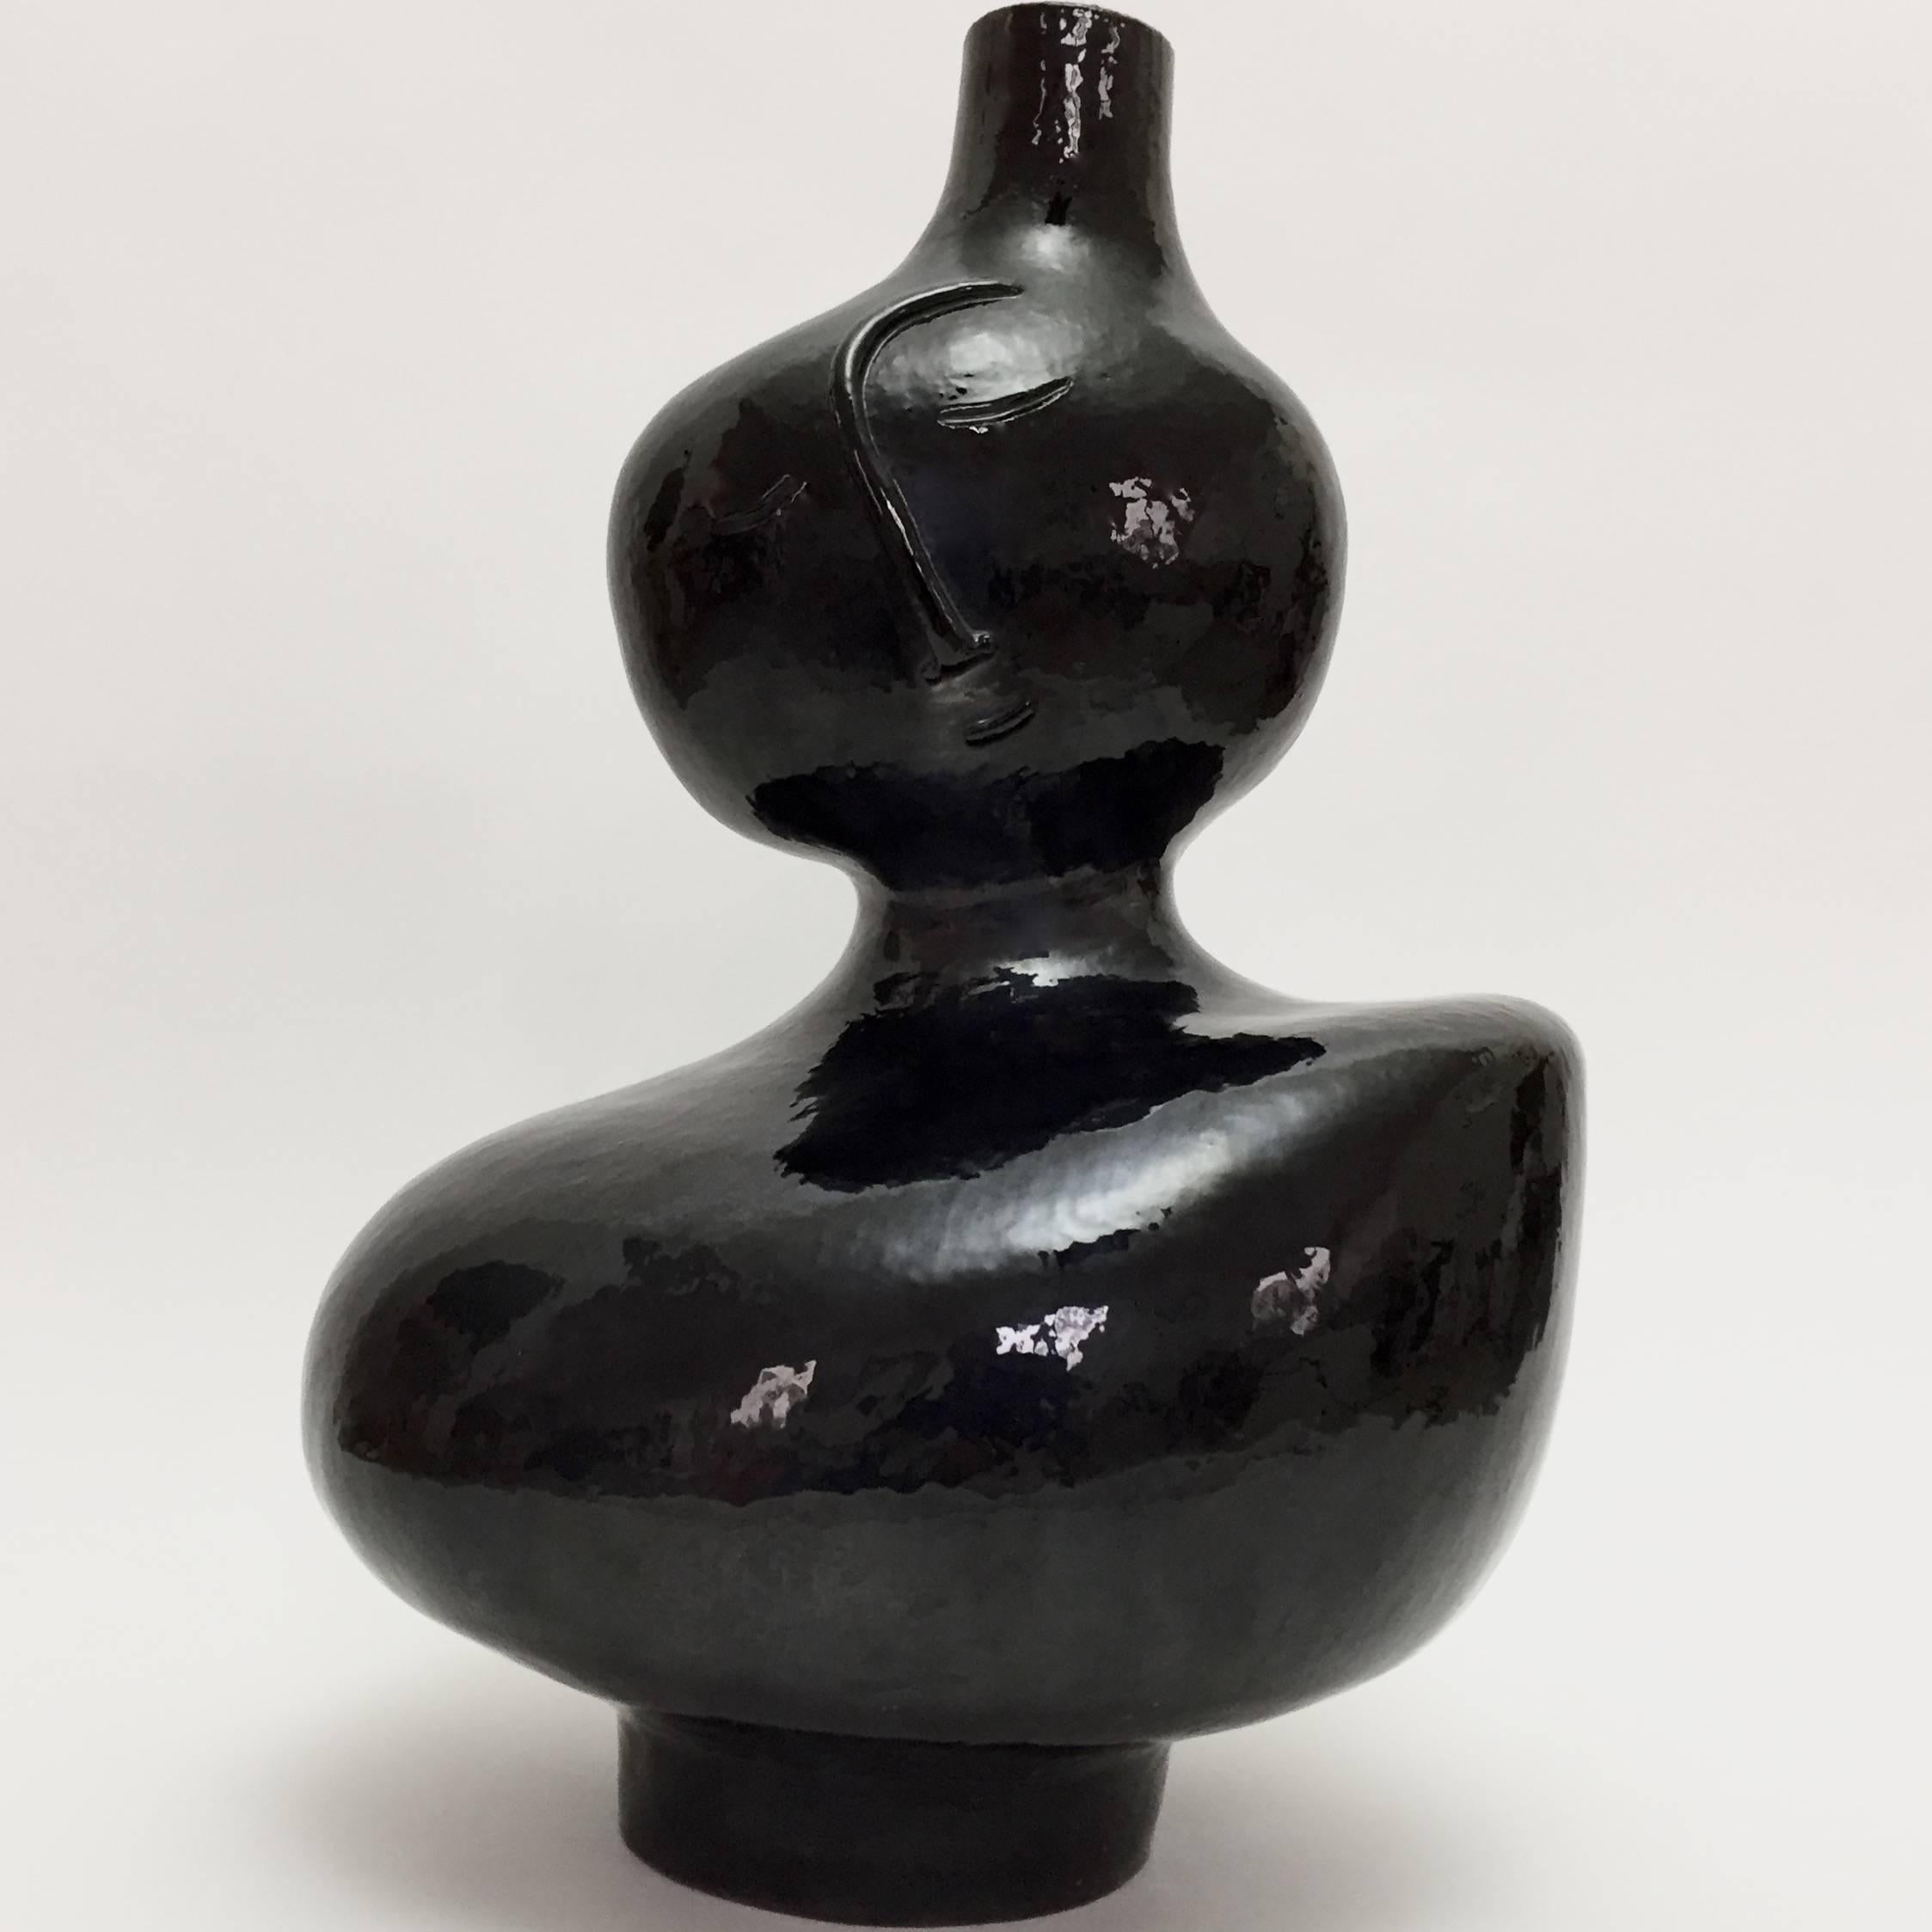 Large biomorphic sculpture forming lamp-base.
Stoneware glazed in glossy black and decorated with a stylized visage on front.
One of a kind handmade piece designed and signed by the French ceramicists, Dalo. 

Note to international purchasers: